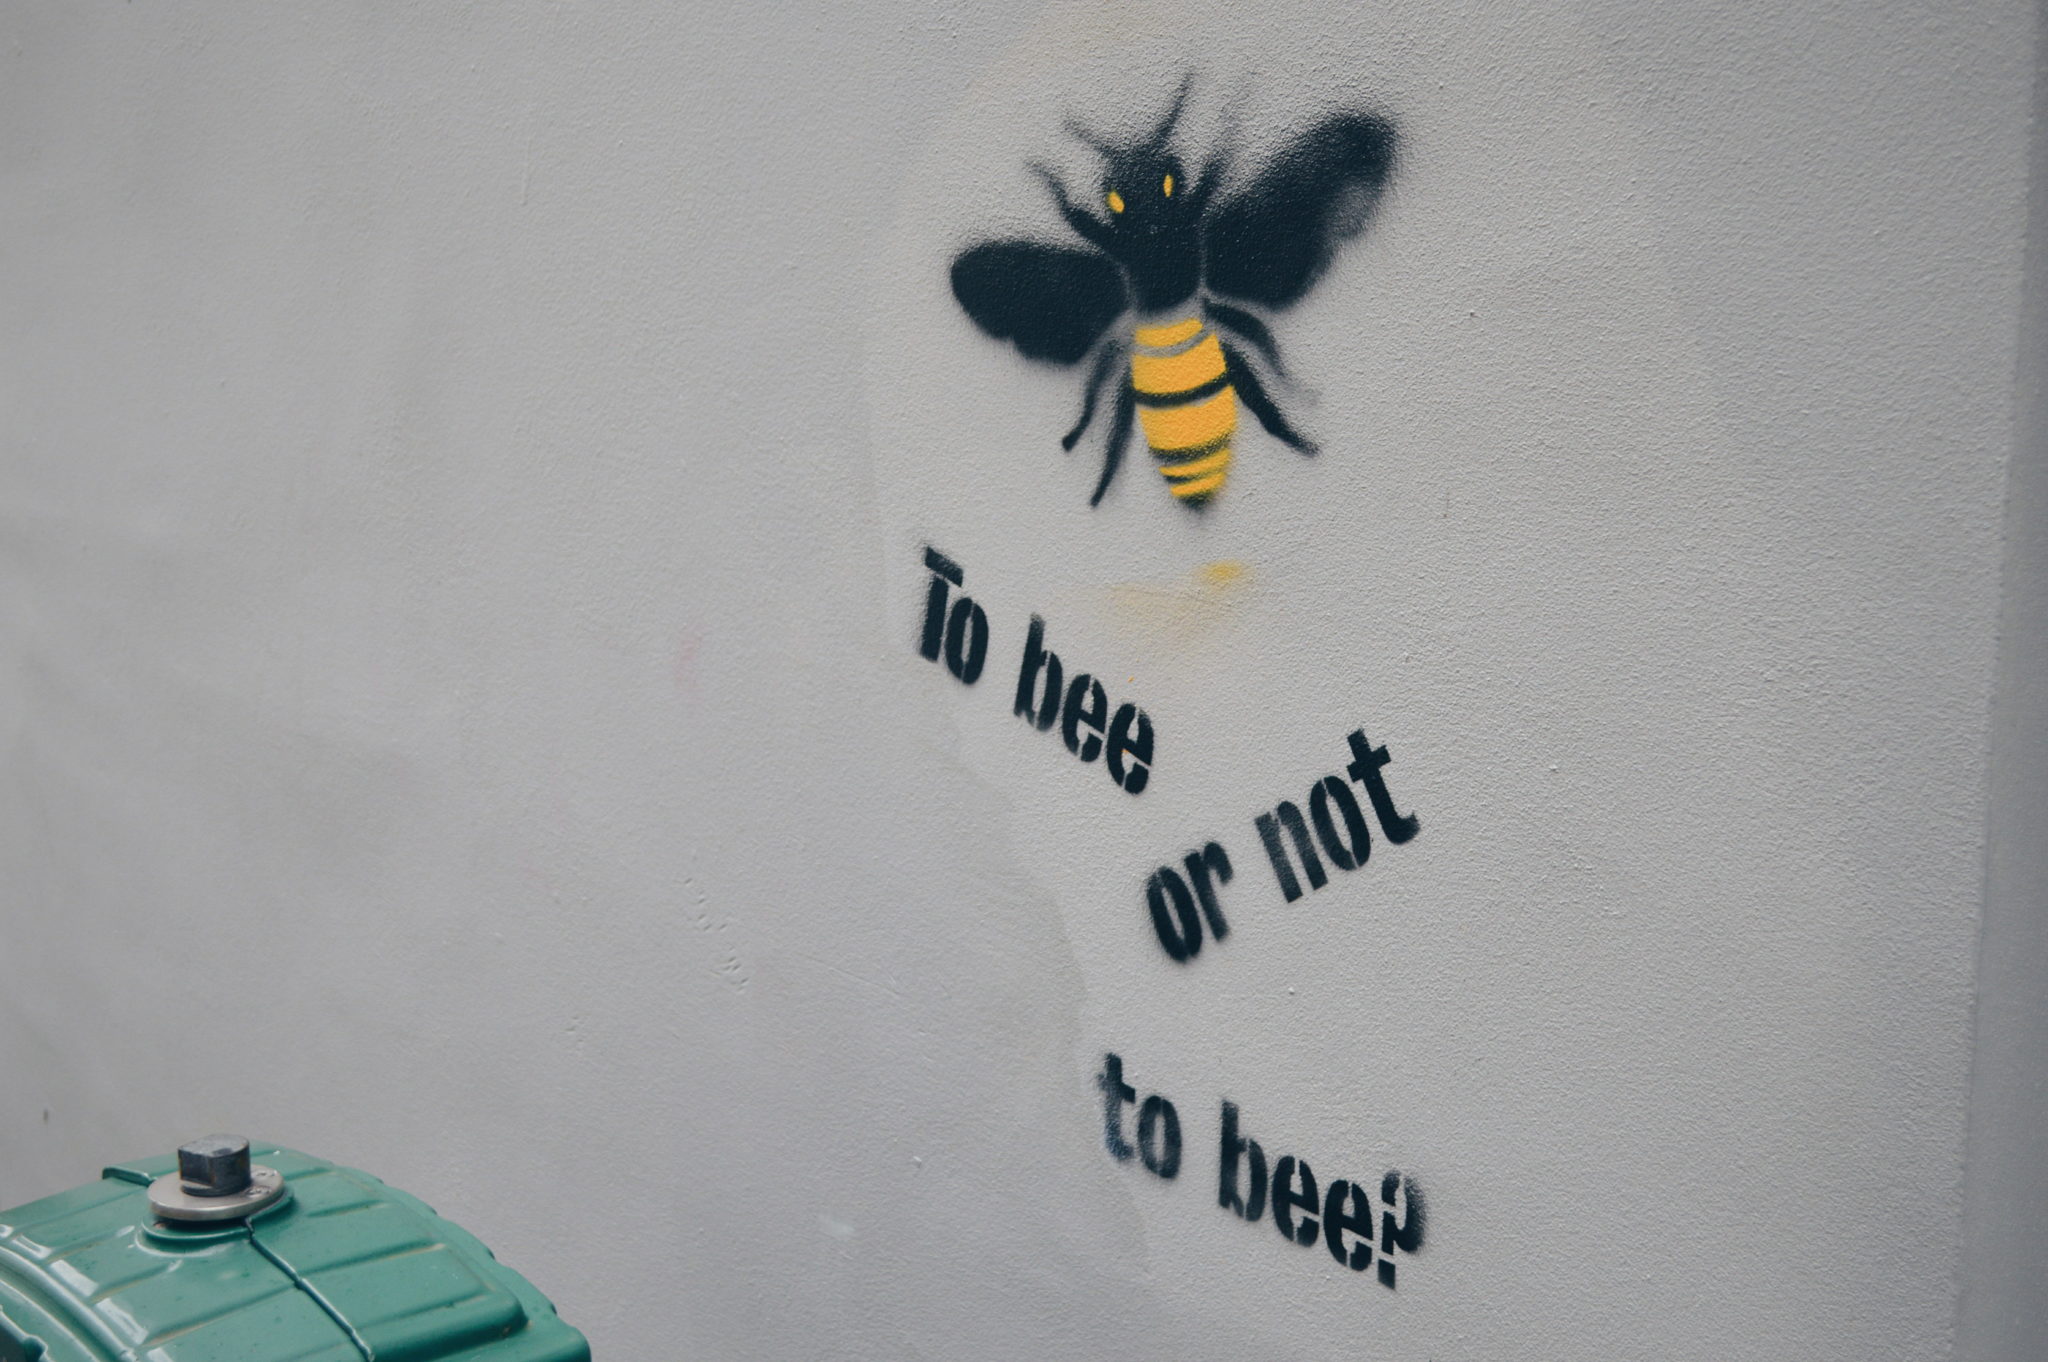 Bee or not to Bee, that is the question